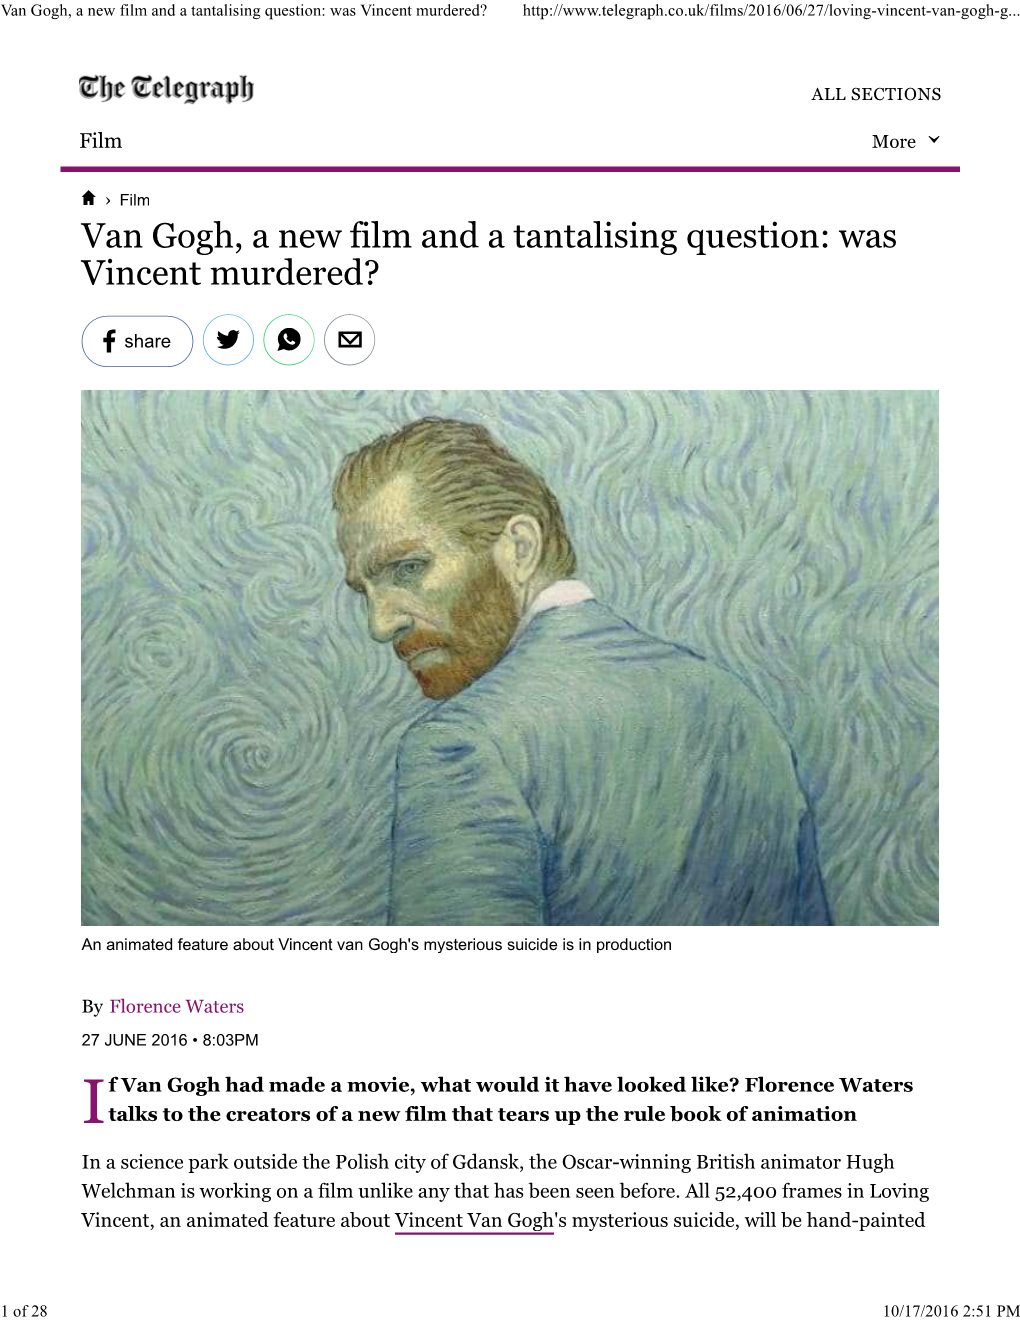 Van Gogh, a New Film and a Tantalising Question: Was Vincent Murdered?